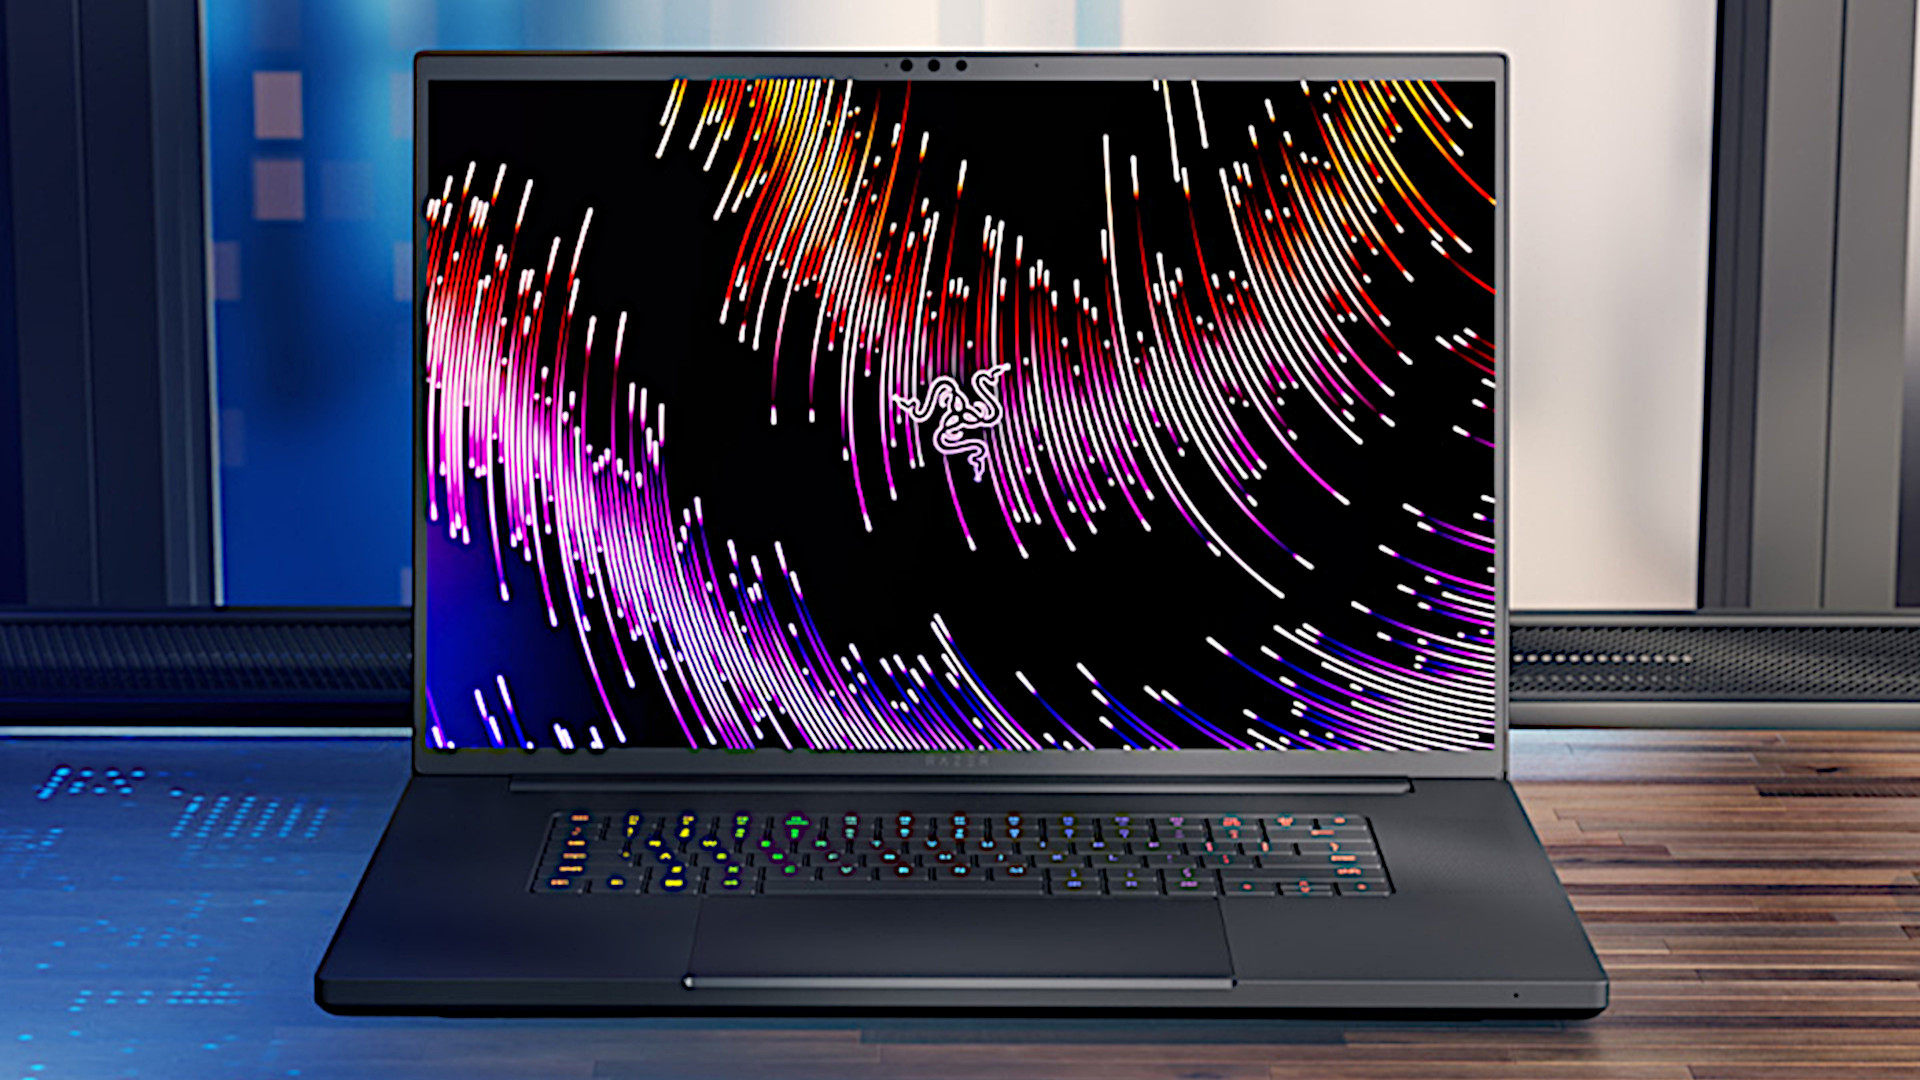 Seize this Razer Blade 18 gaming laptop at its lowest ever price